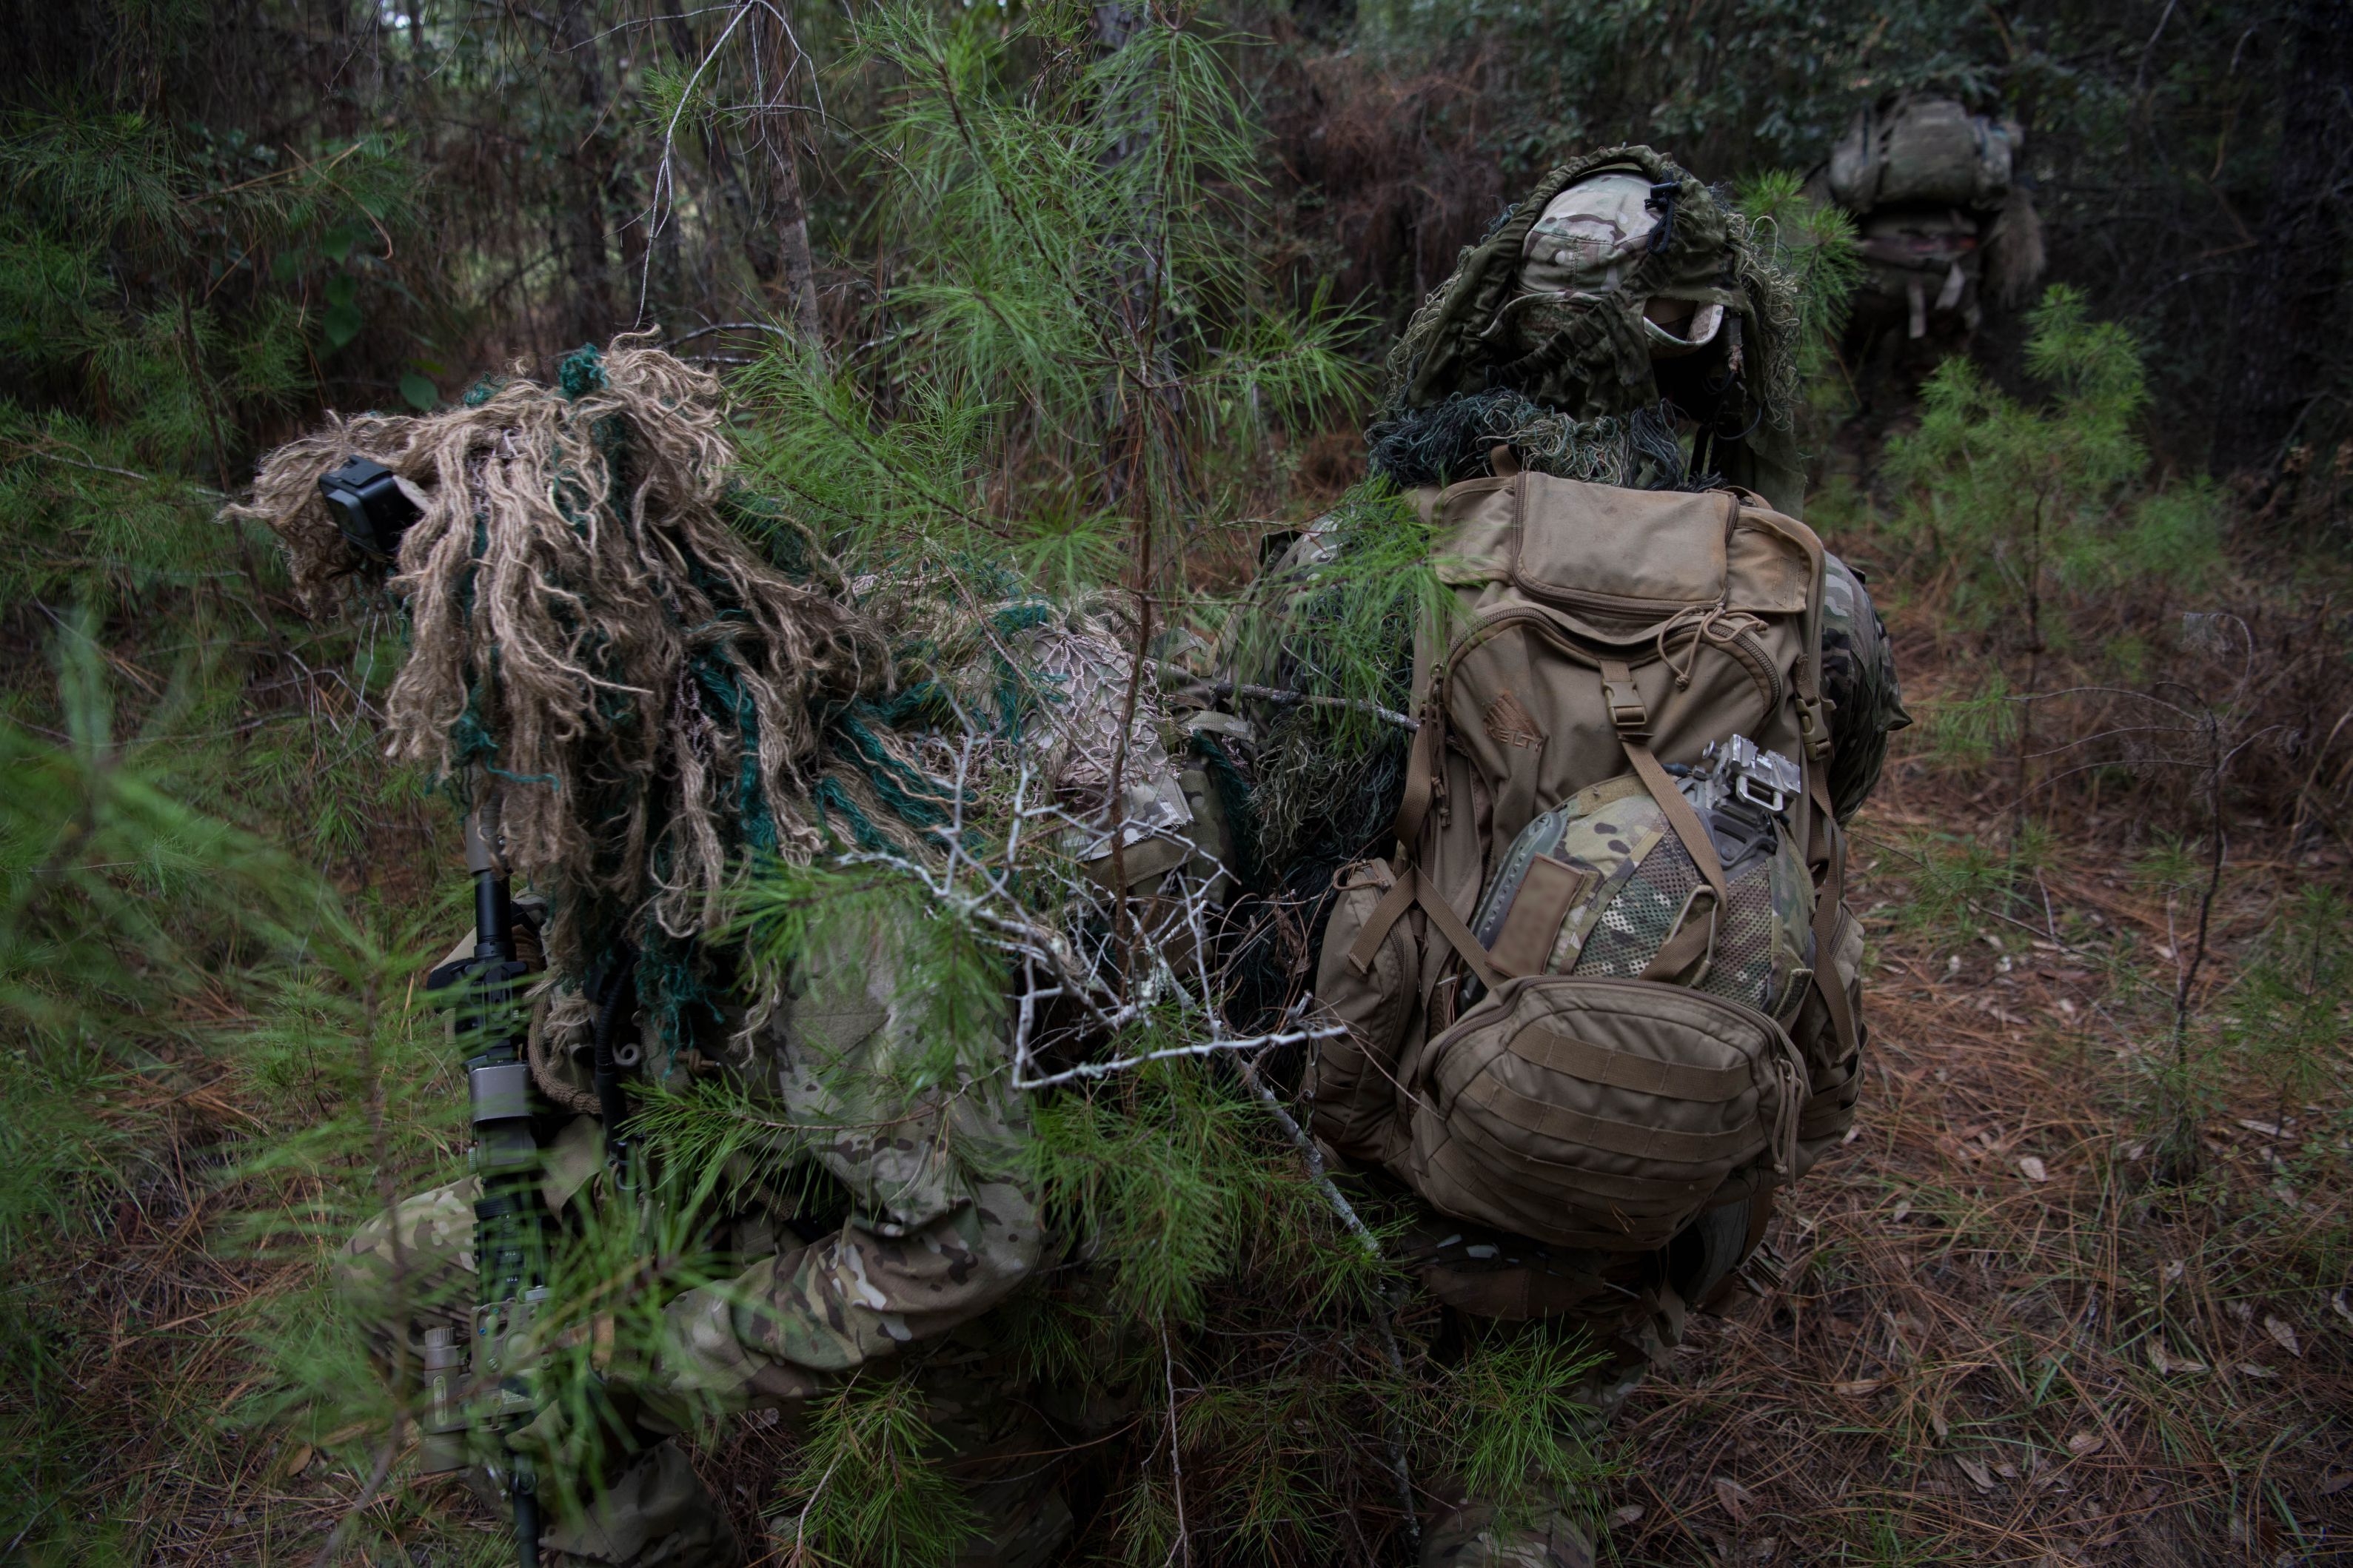 U.S. Air Force Special Tactics operators set up security while a teammate moves into a hide site during a full mission profile as part of a beta Special Reconnaissance course near Hurlburt Field, Florida, Sept. 25, 2019.